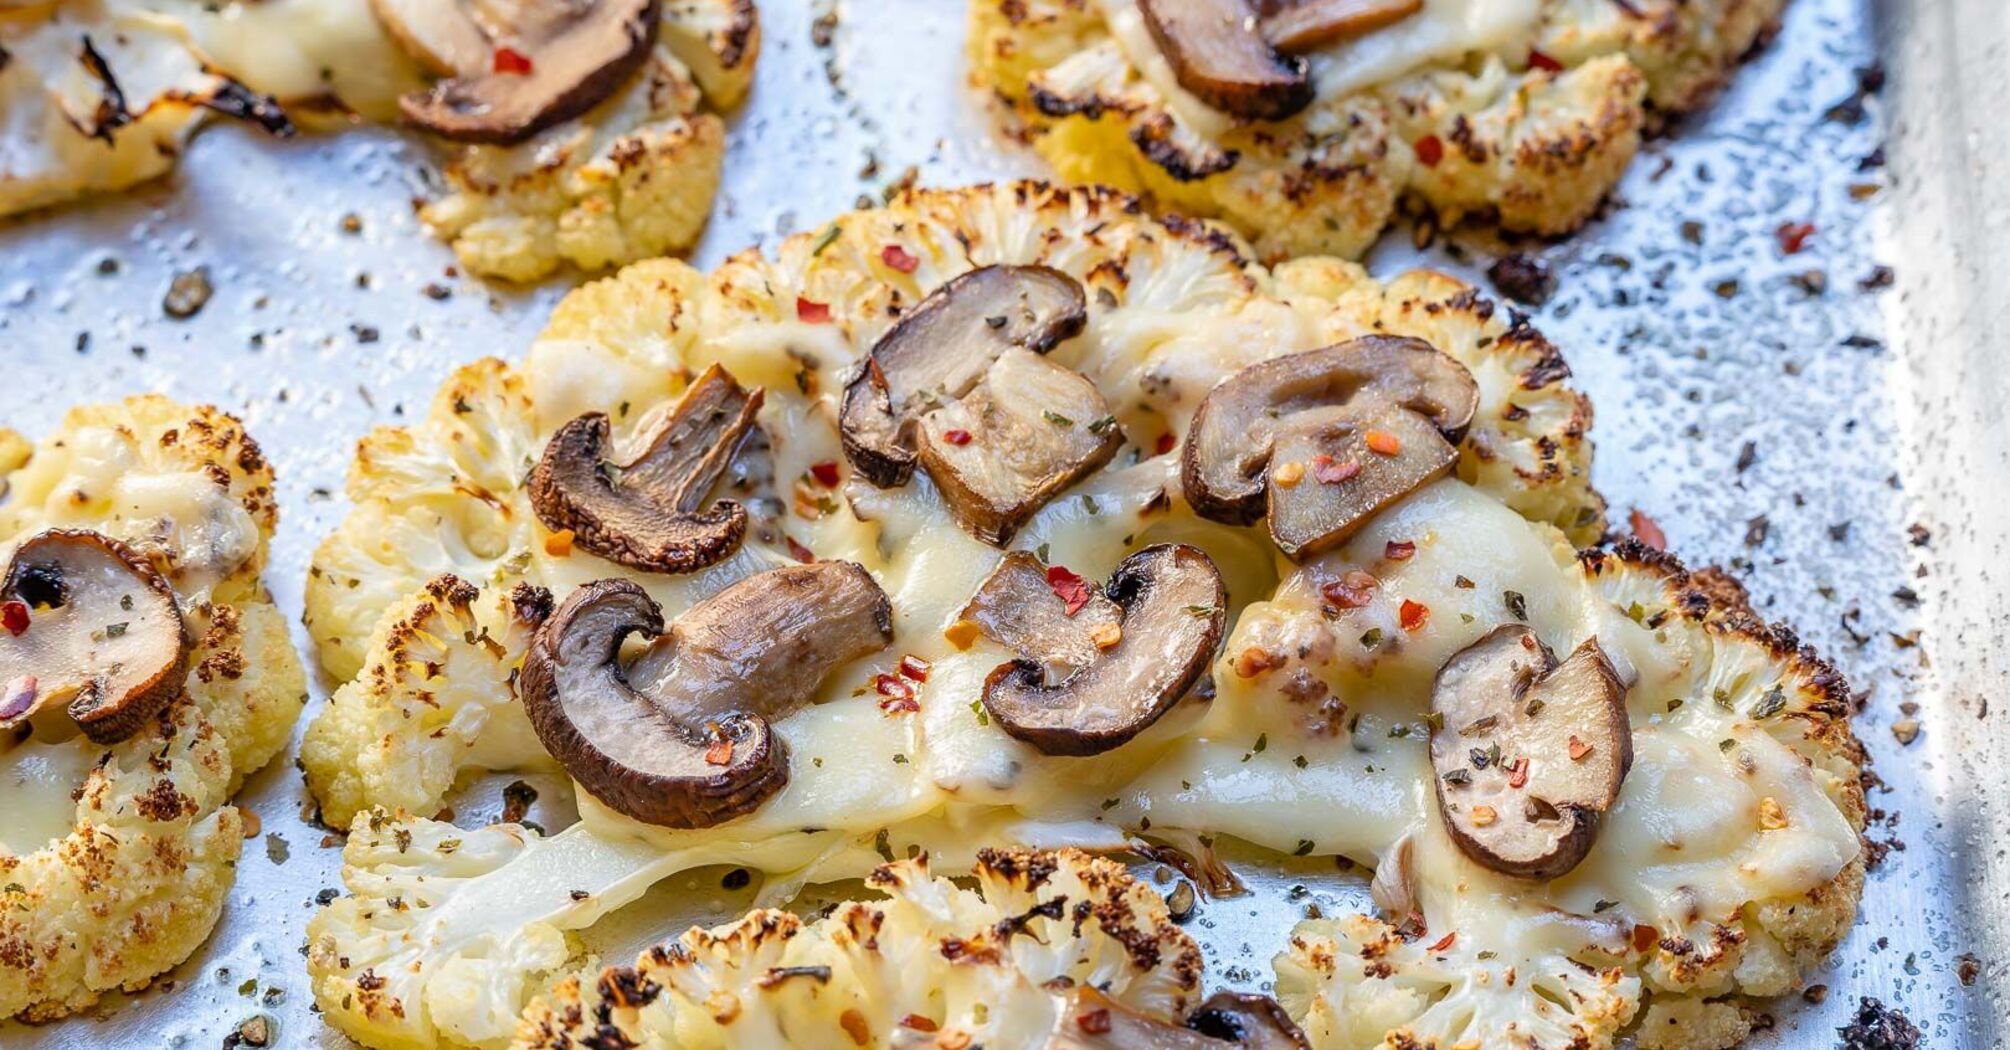 Cauliflower steaks with mushrooms and cheese in the oven